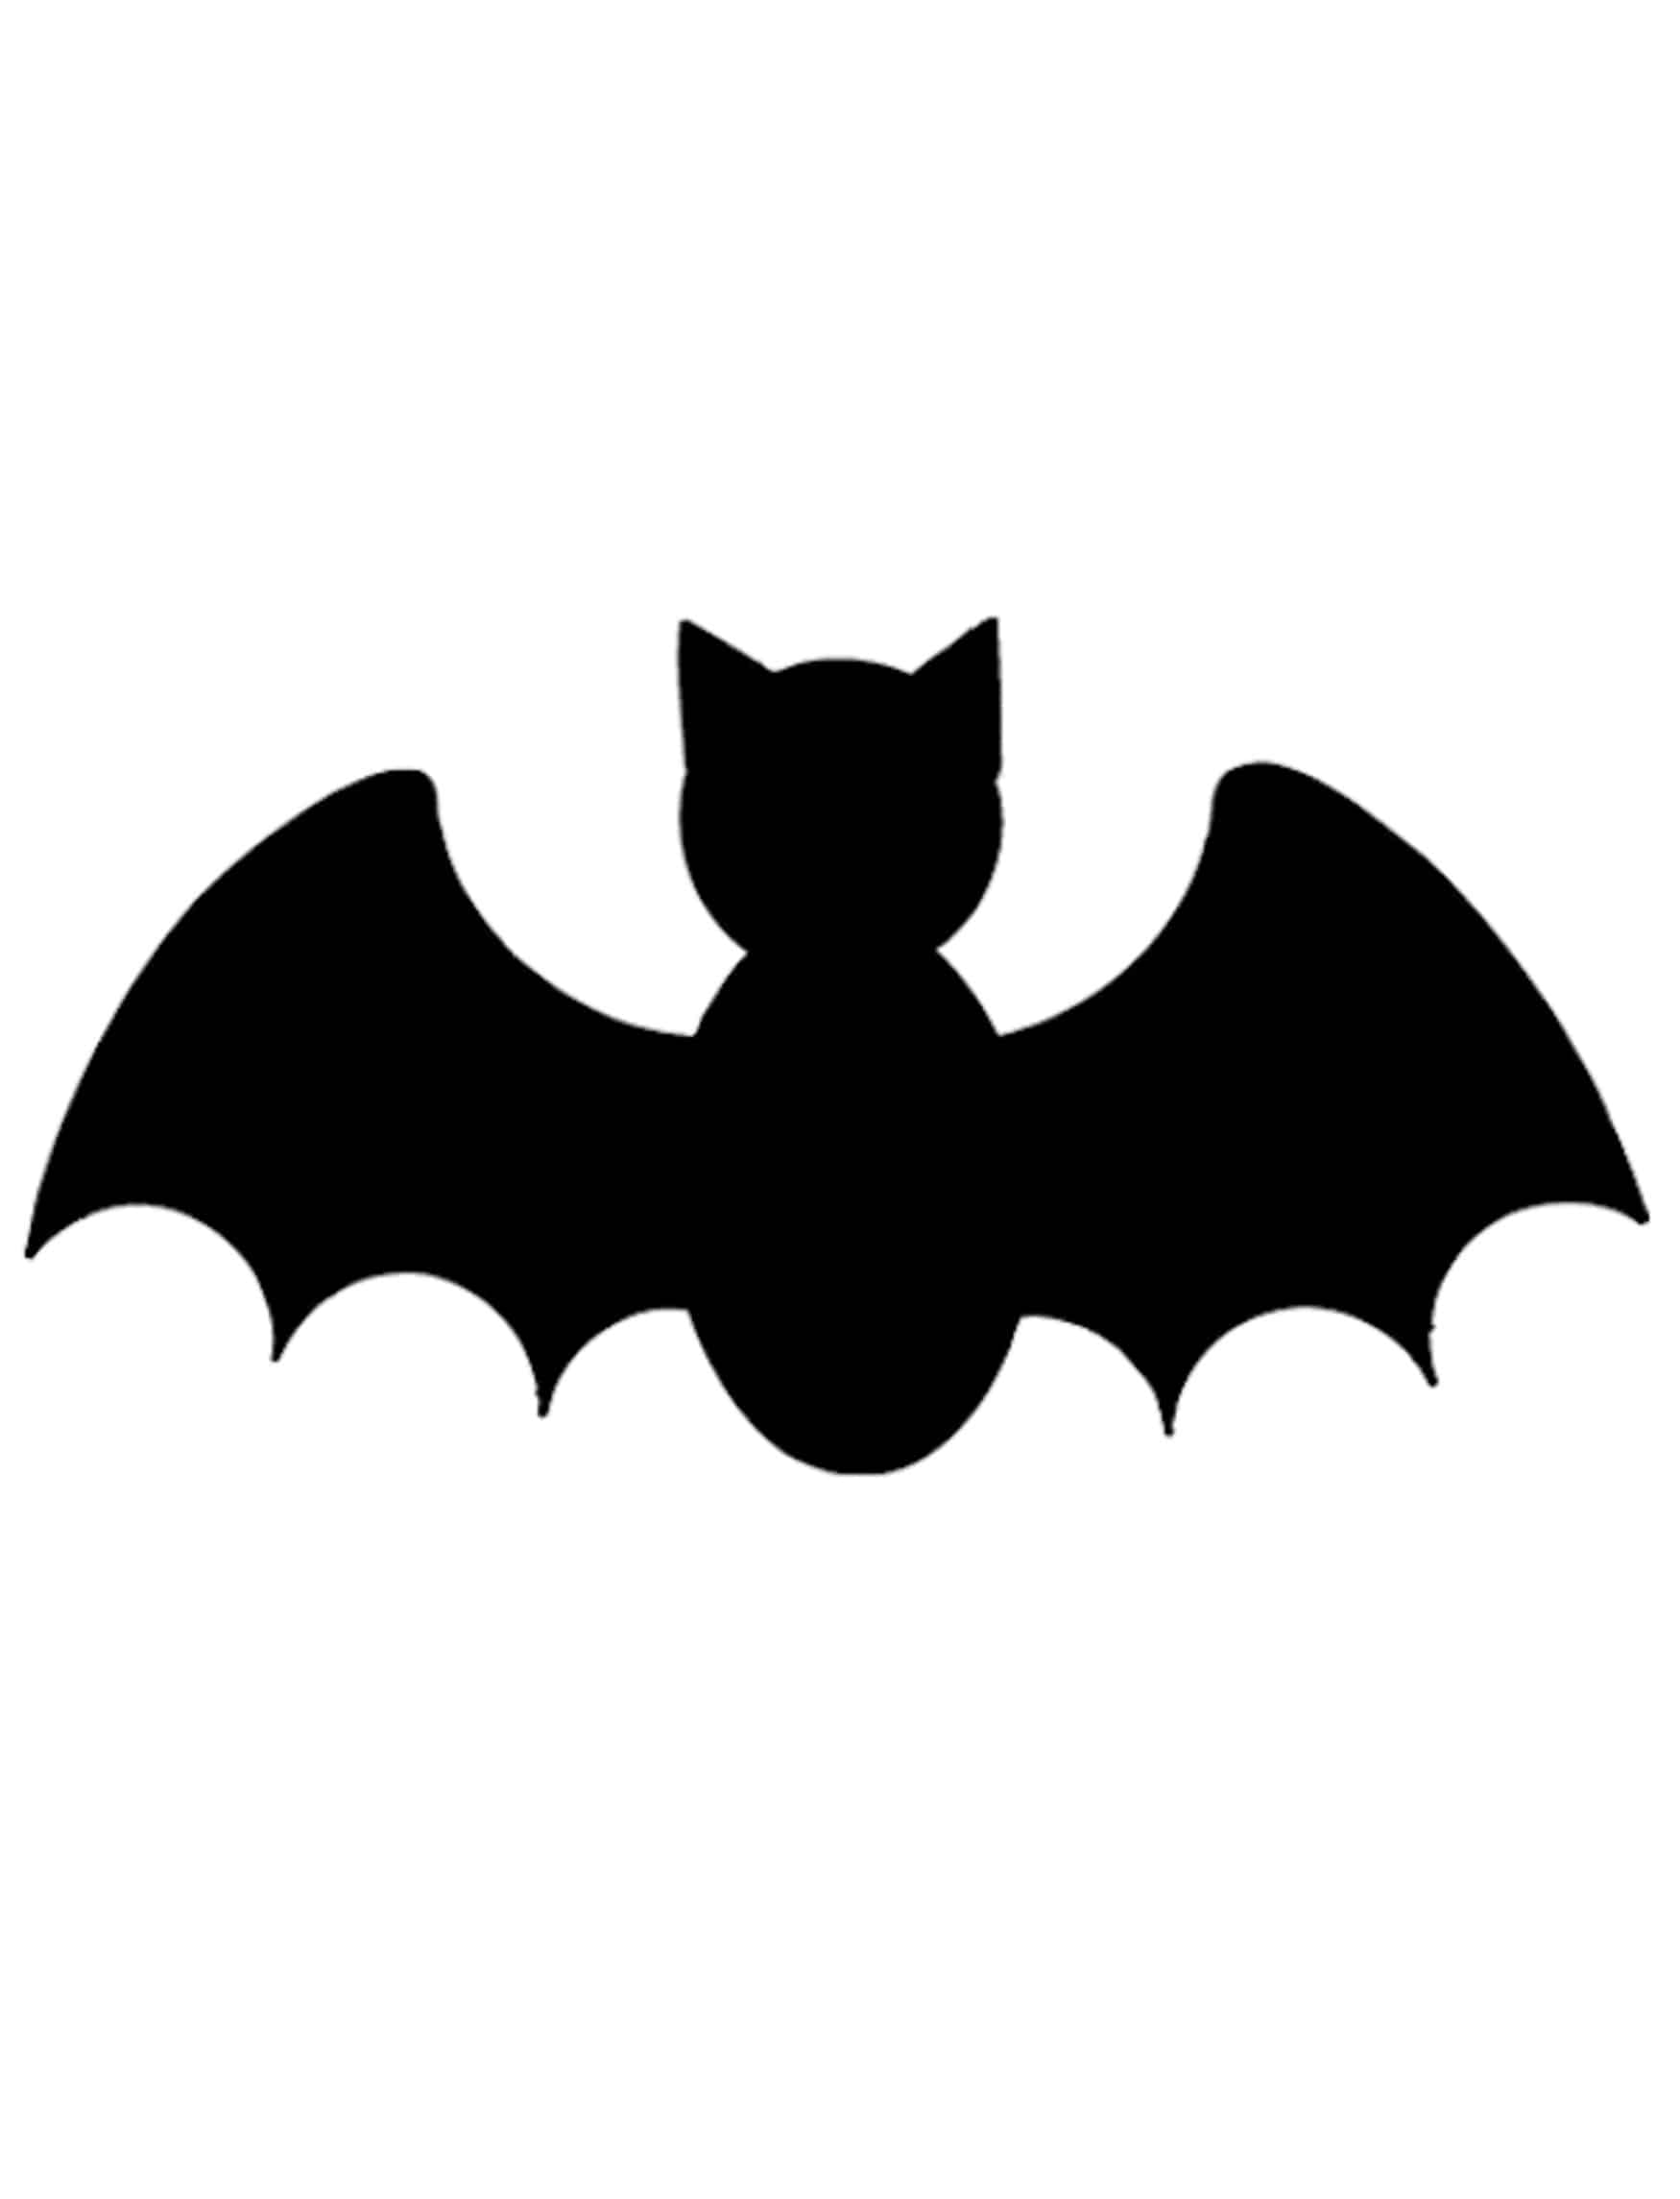 simple-bat-pumpkin-carving-pattern-creative-ads-and-more